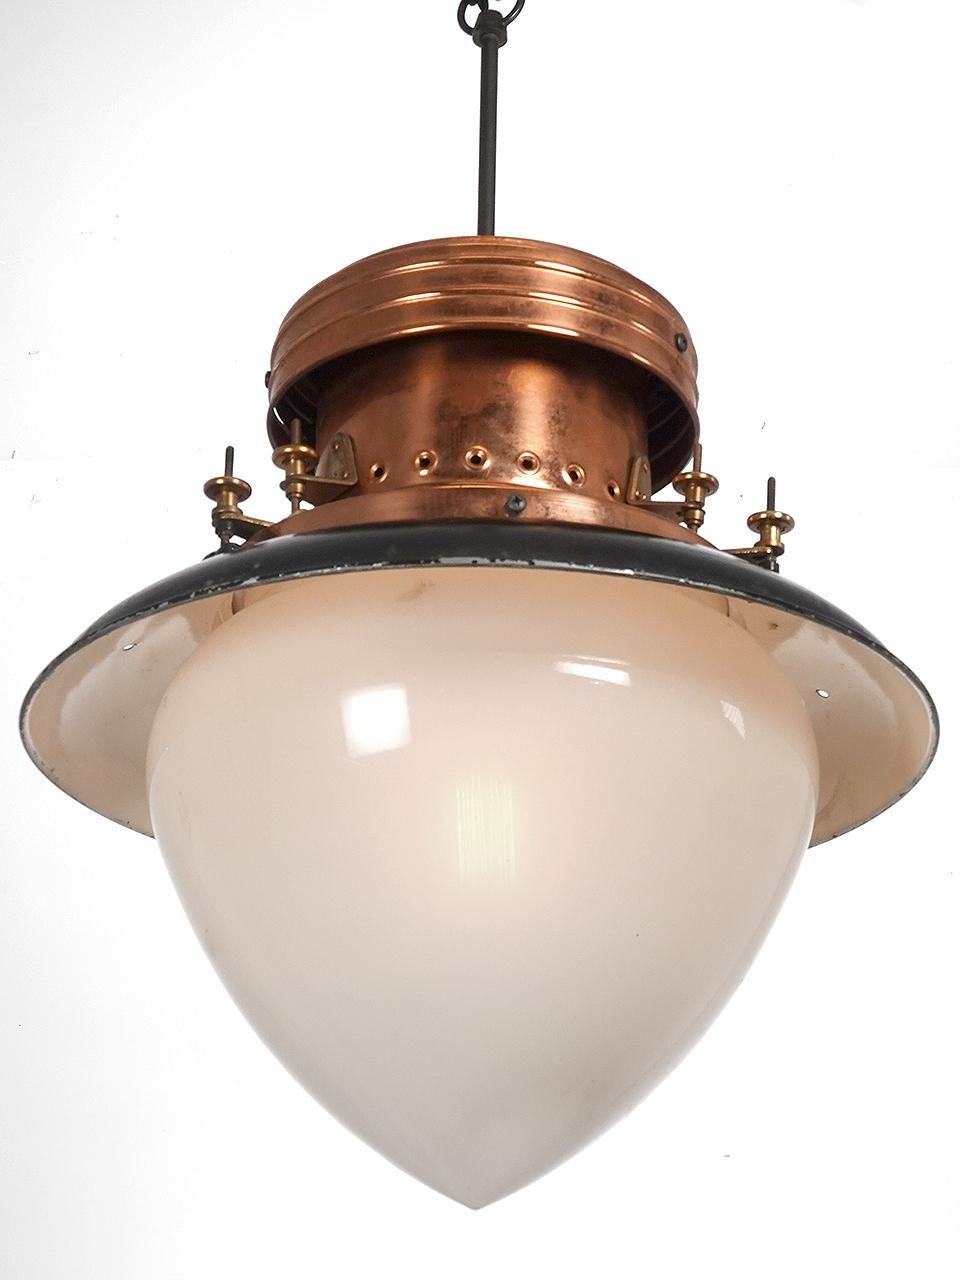 Industrial Unique Gas Lamp in Polished Copper and Large Acorn Shade